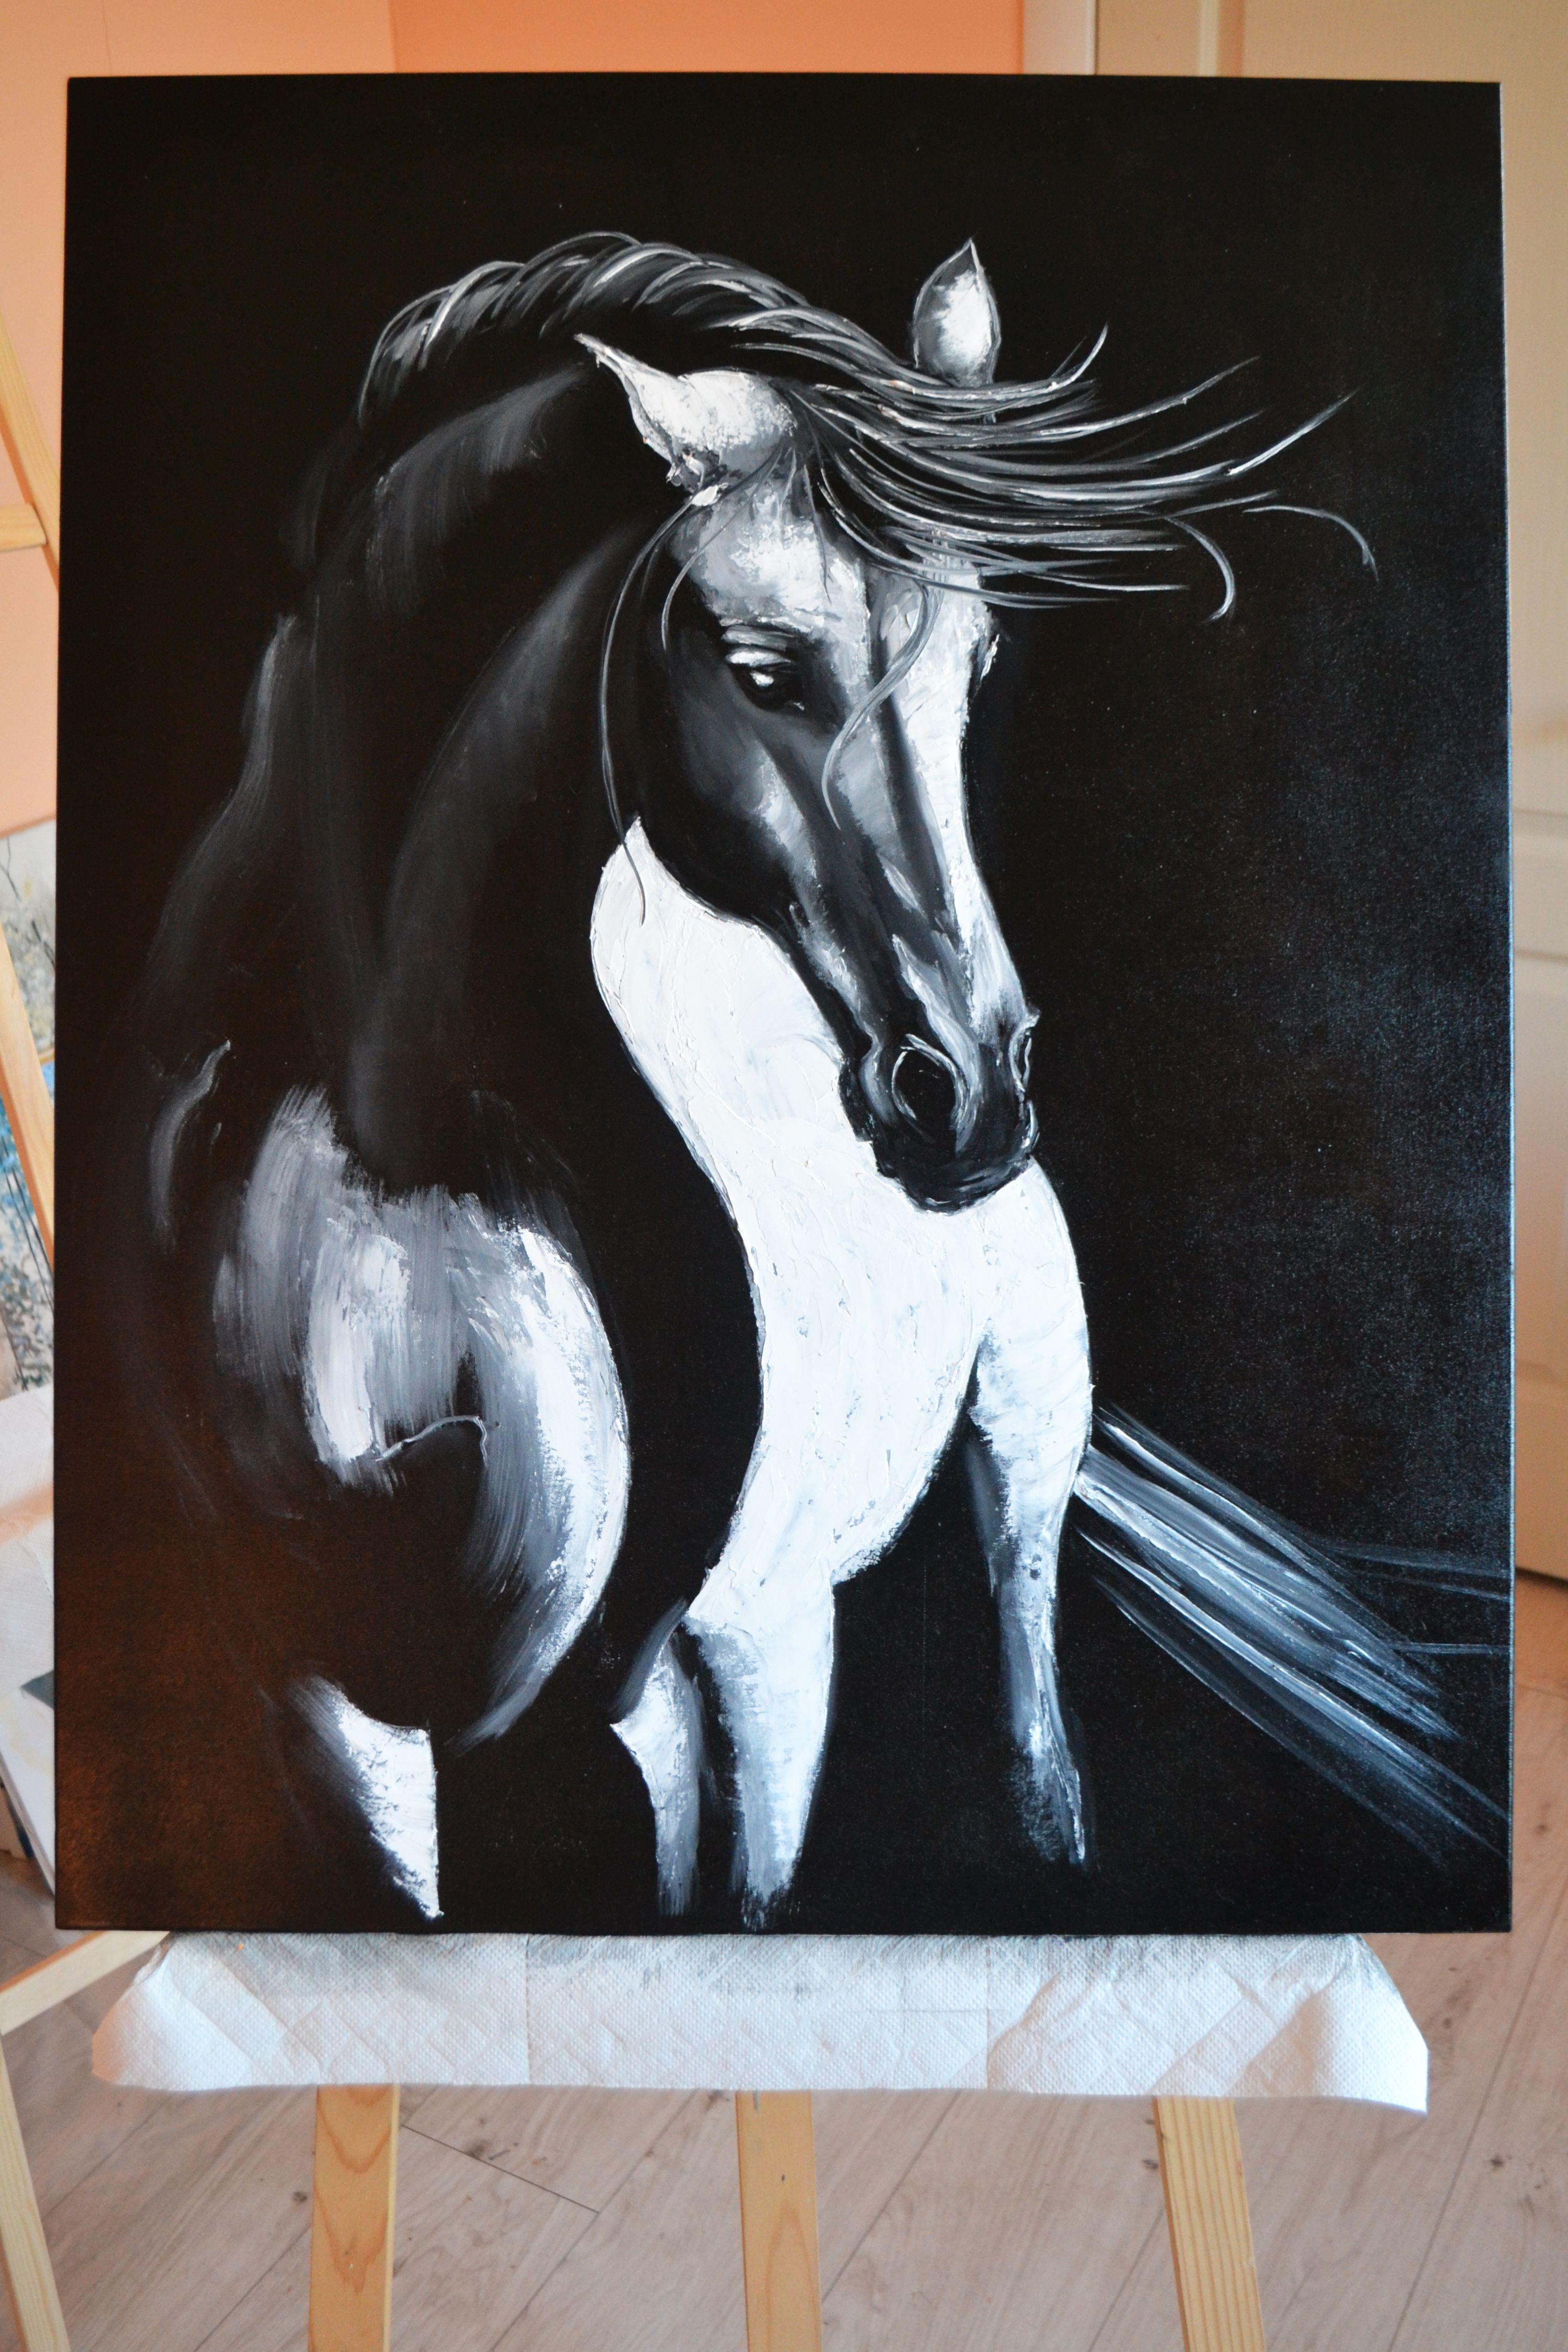 White horse on the dark background. Majestic beautiful horse. Black and white portrait of a horse with a magnificent mane.    Calmness, thoughtfulness, concentration, spirituality.    Side's/ edges of canvas are painted into black.    Oil on a